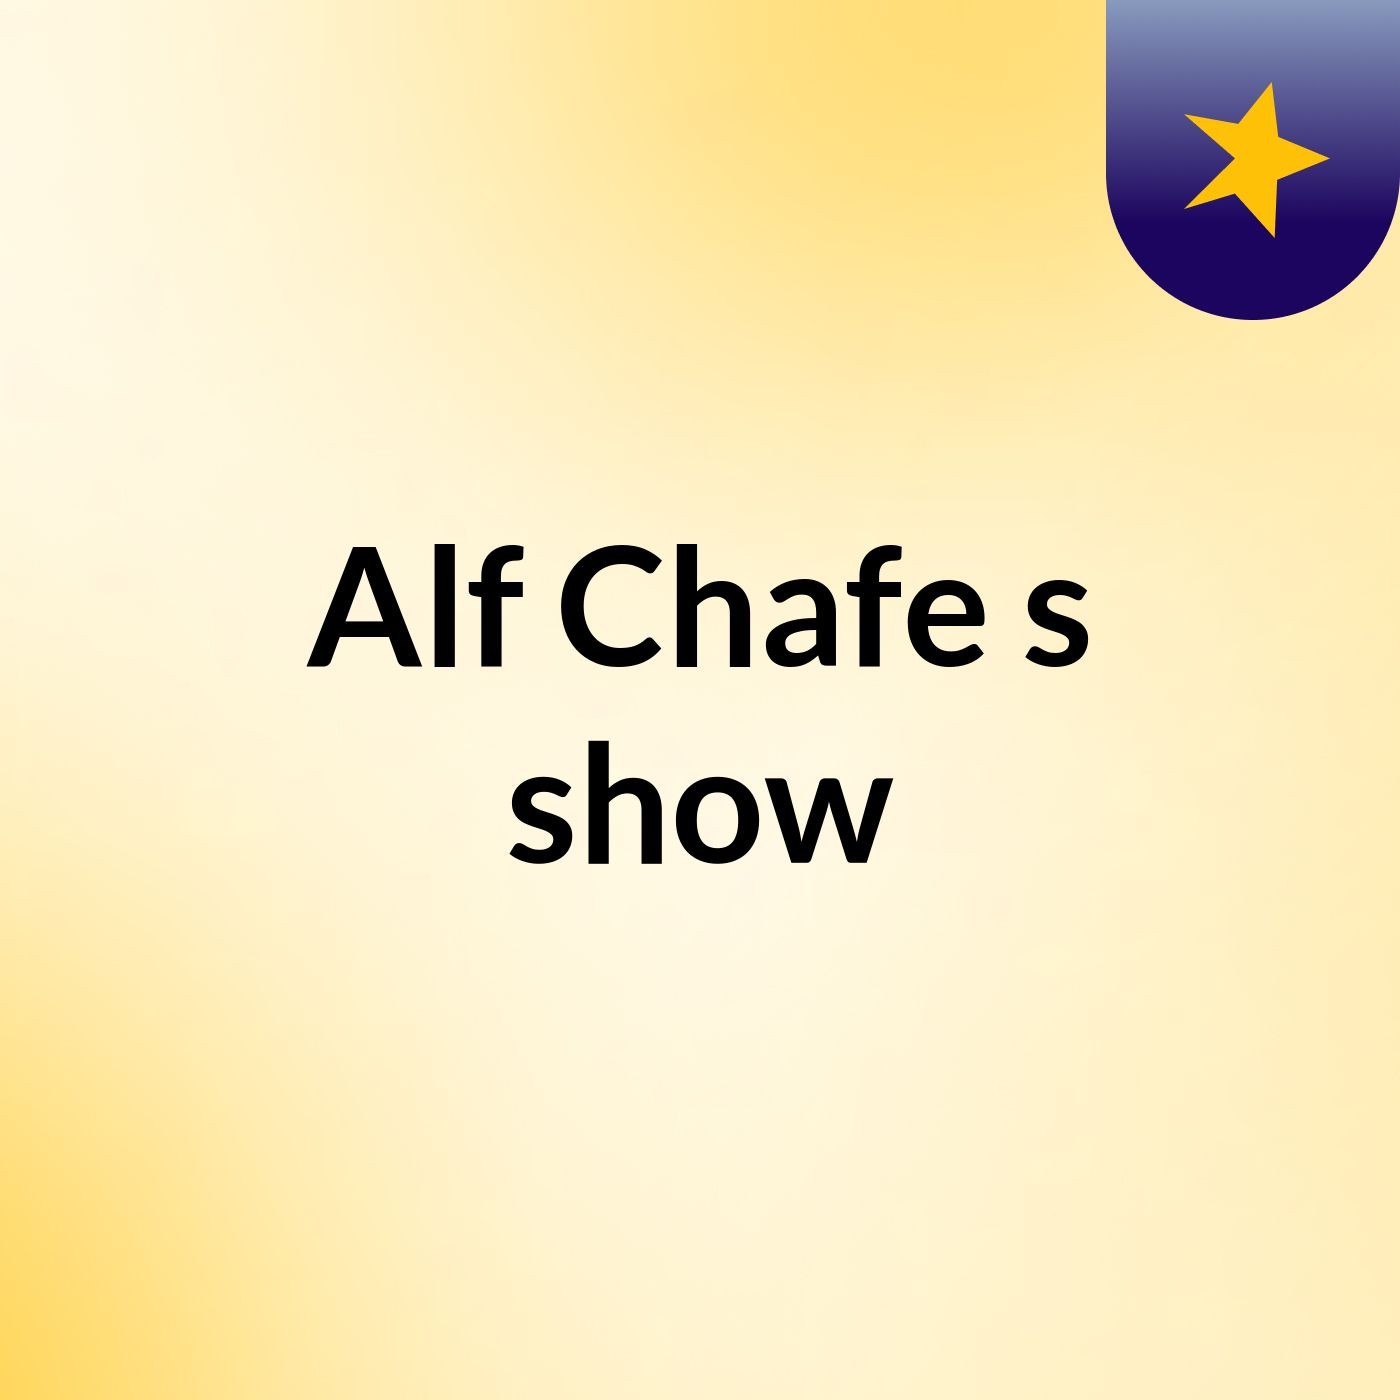 Alf Chafe's show